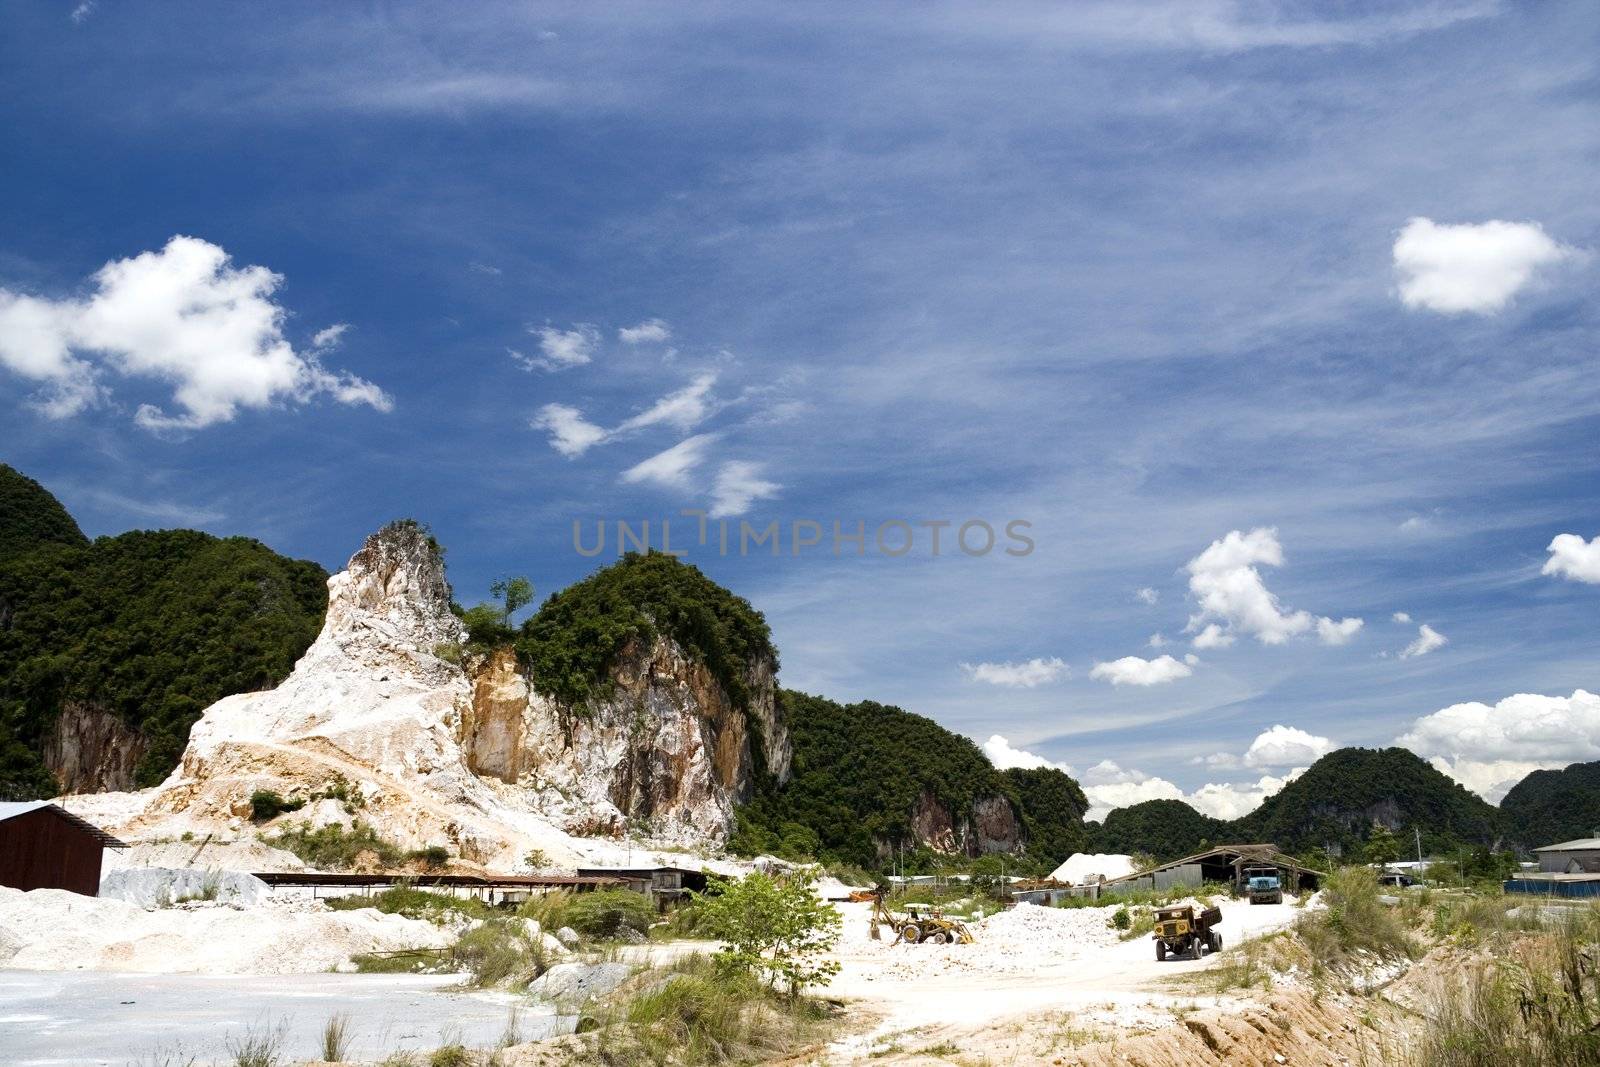 Image of a granite rock quarry in Malaysia.